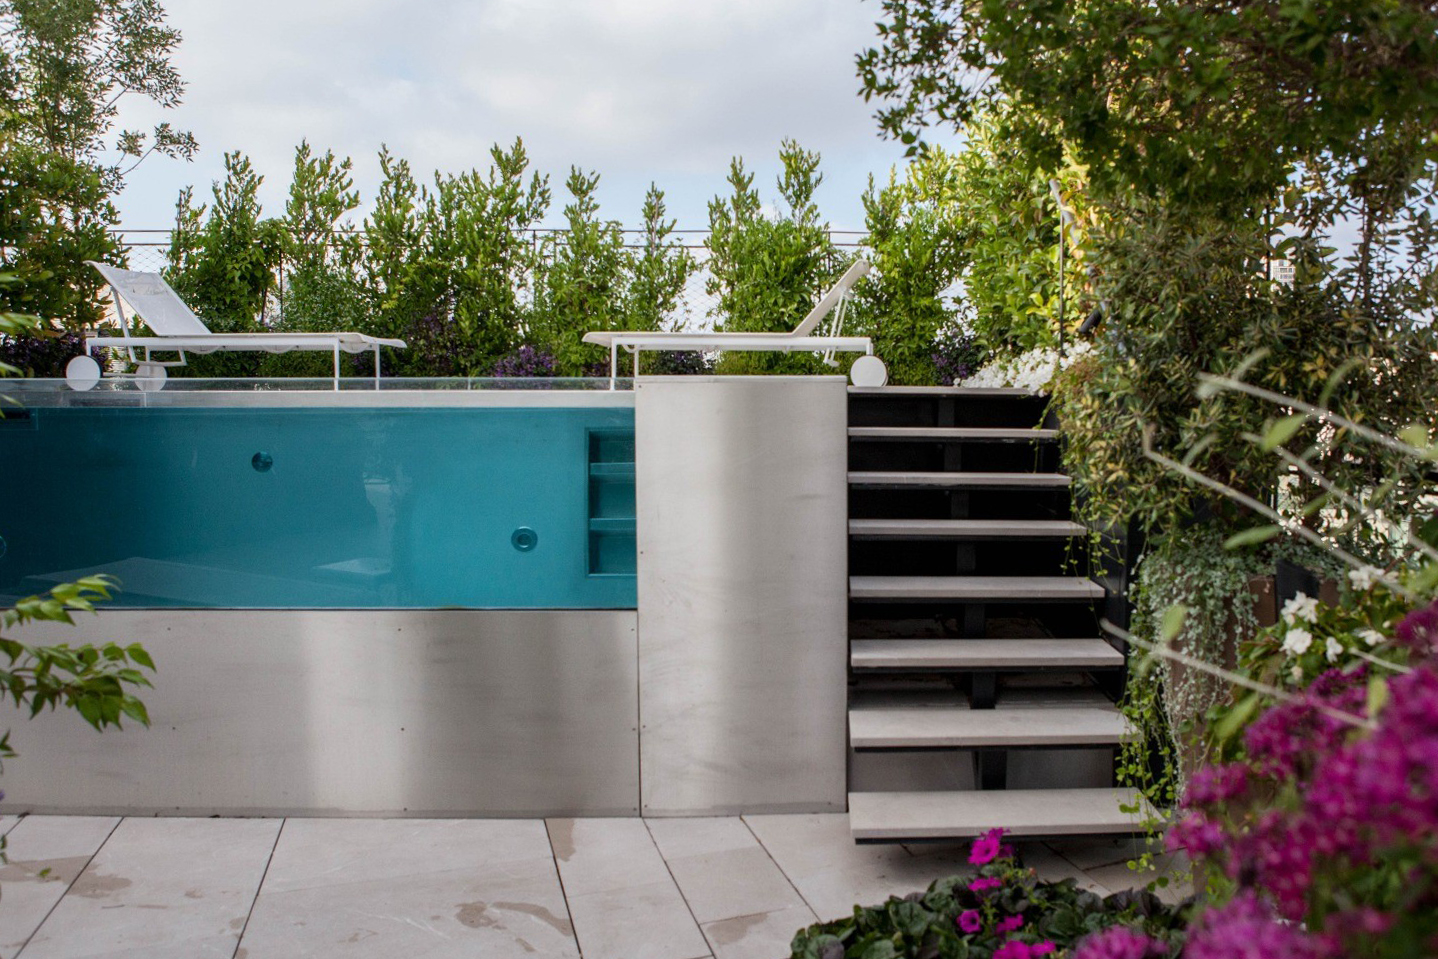 Do you want a truly luxurious pool? Choose an infinity pool with a glass wall